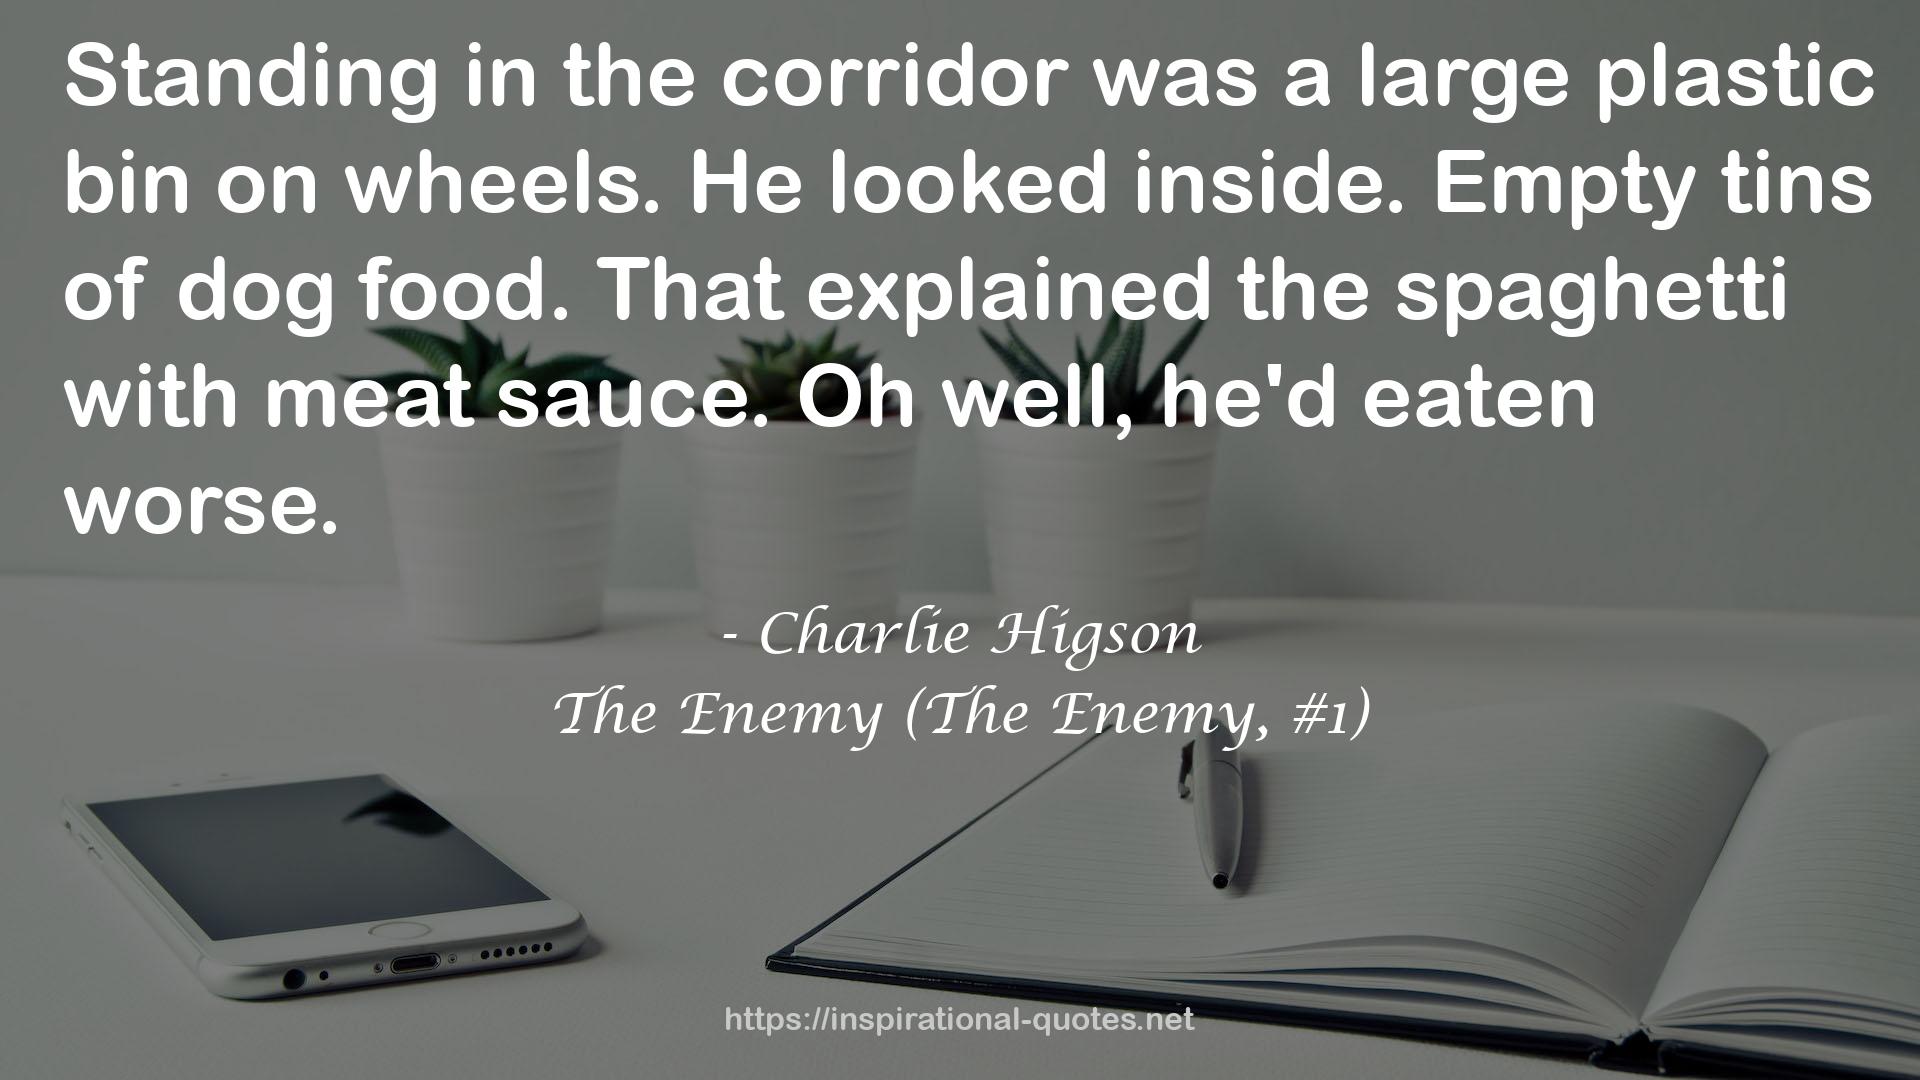 The Enemy (The Enemy, #1) QUOTES